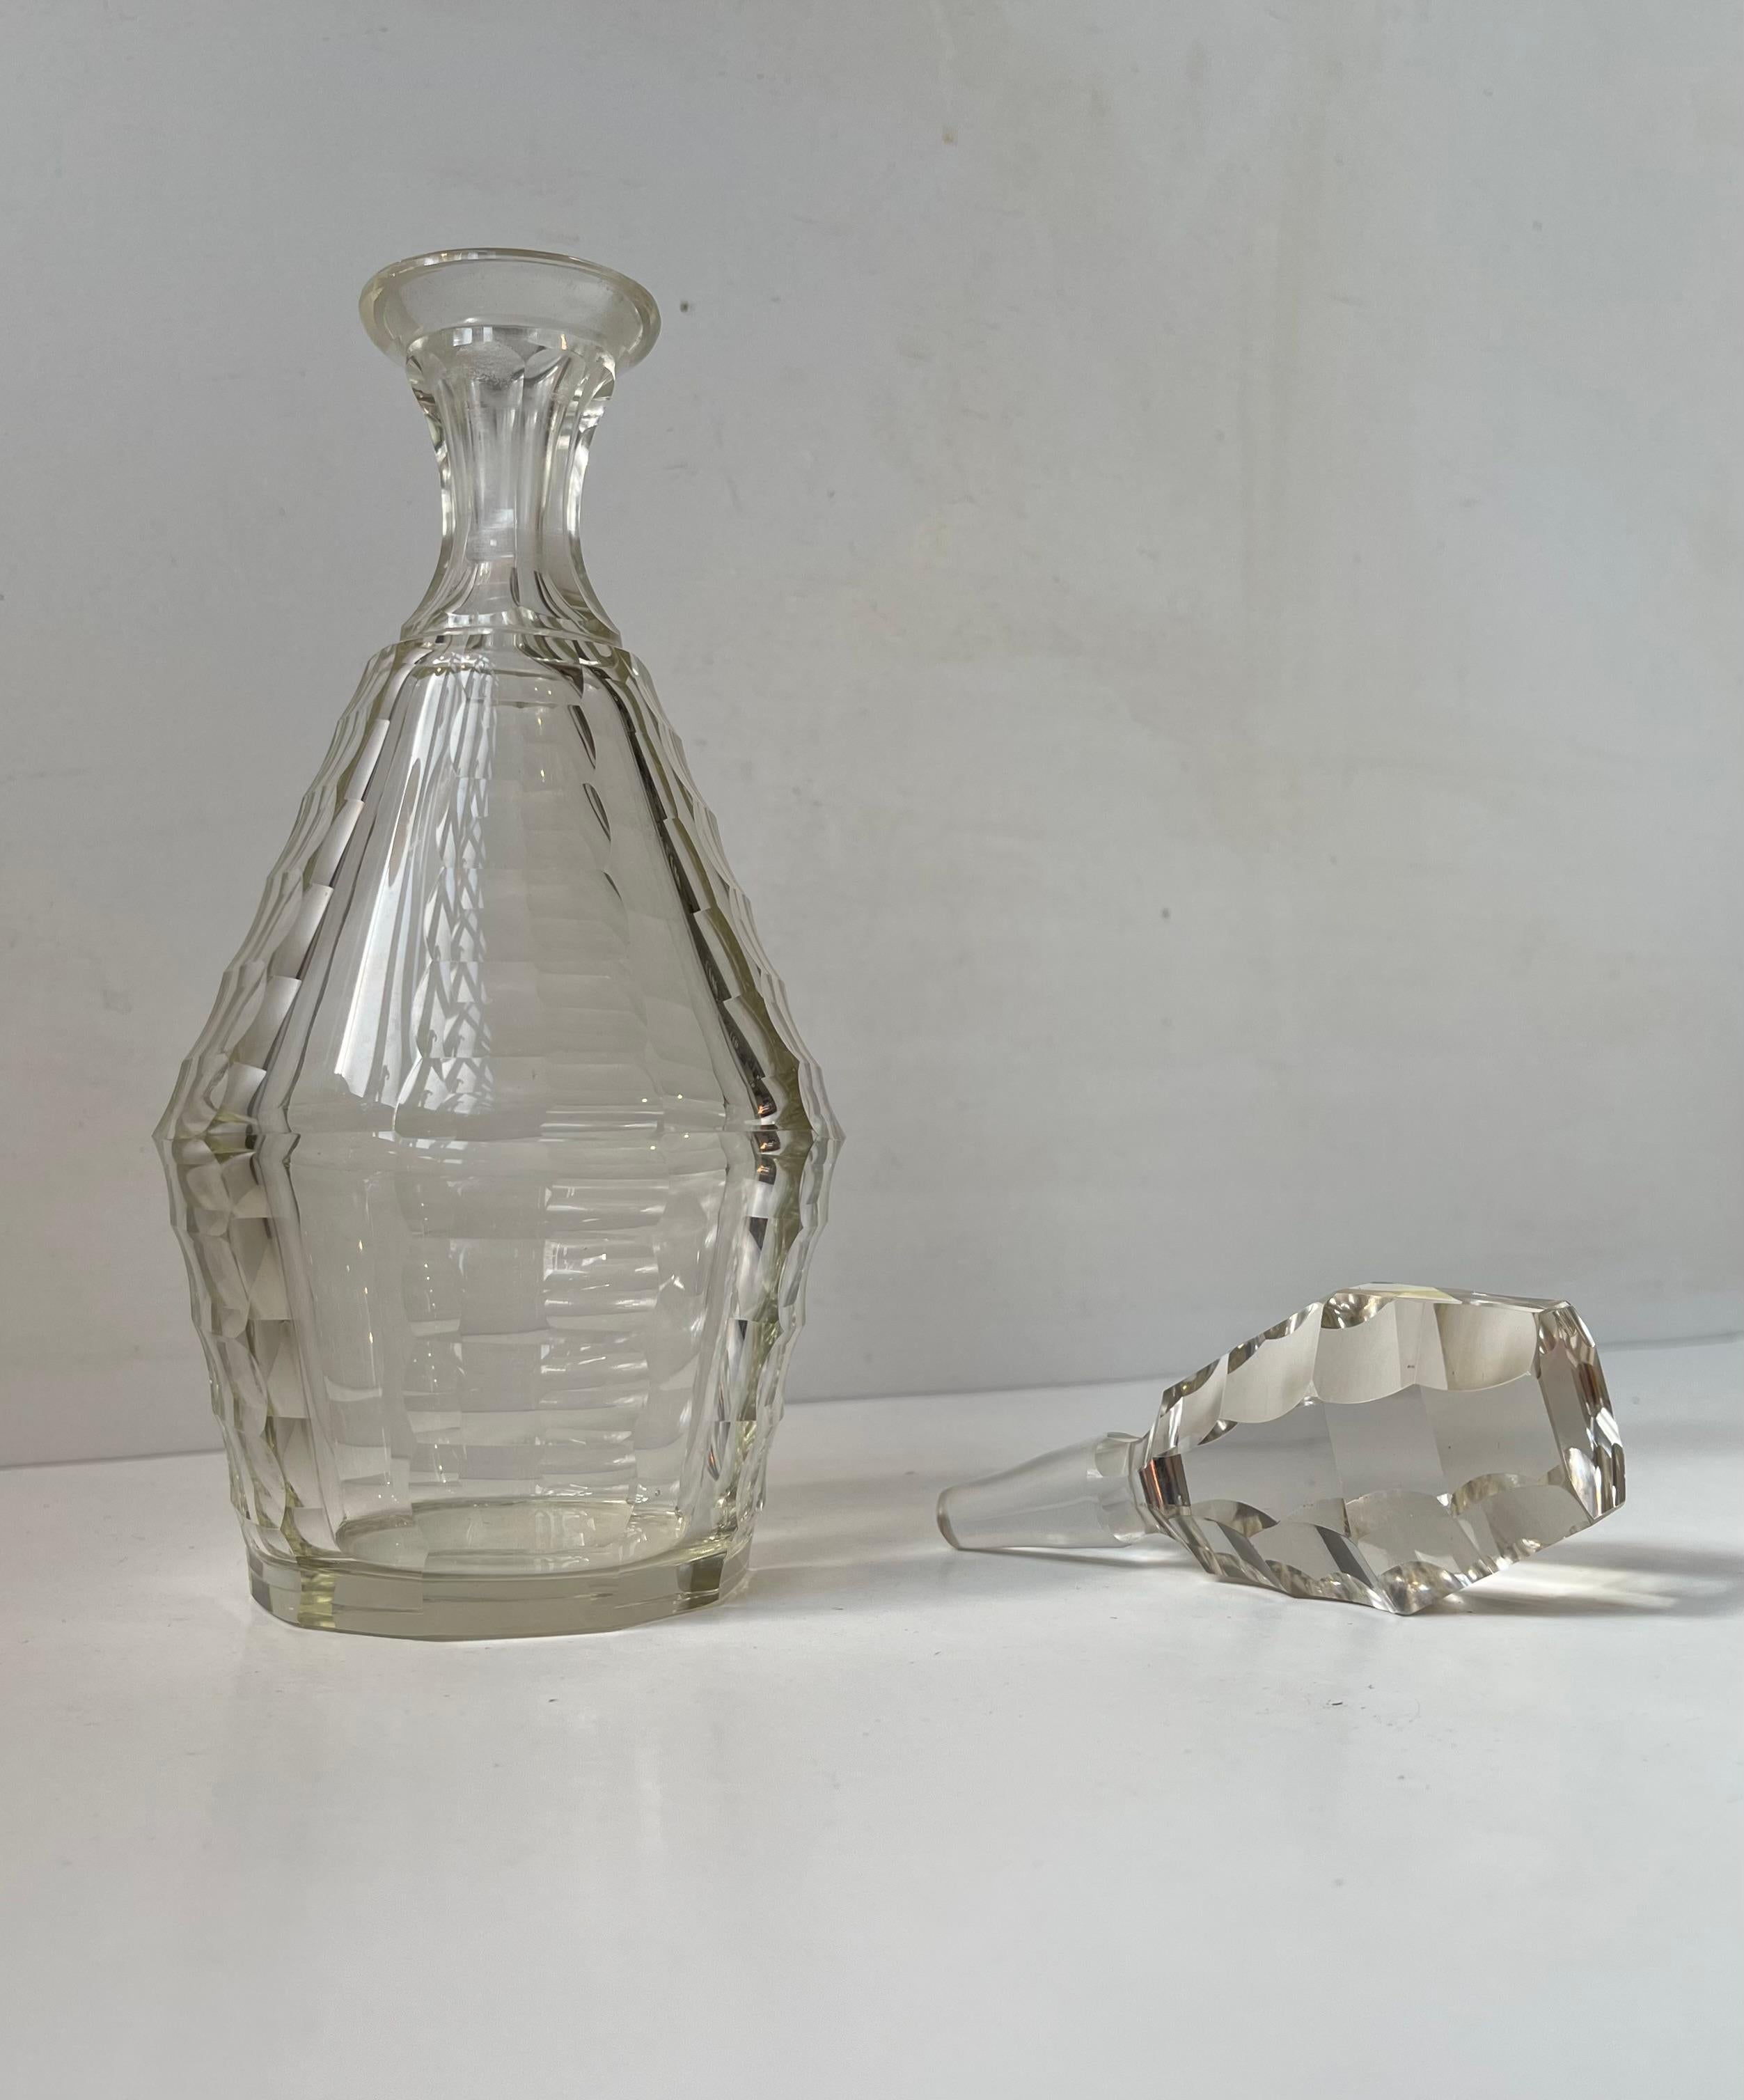 French Baccarat France Art Deco Decanter in Faceted Crystal, 1930s For Sale